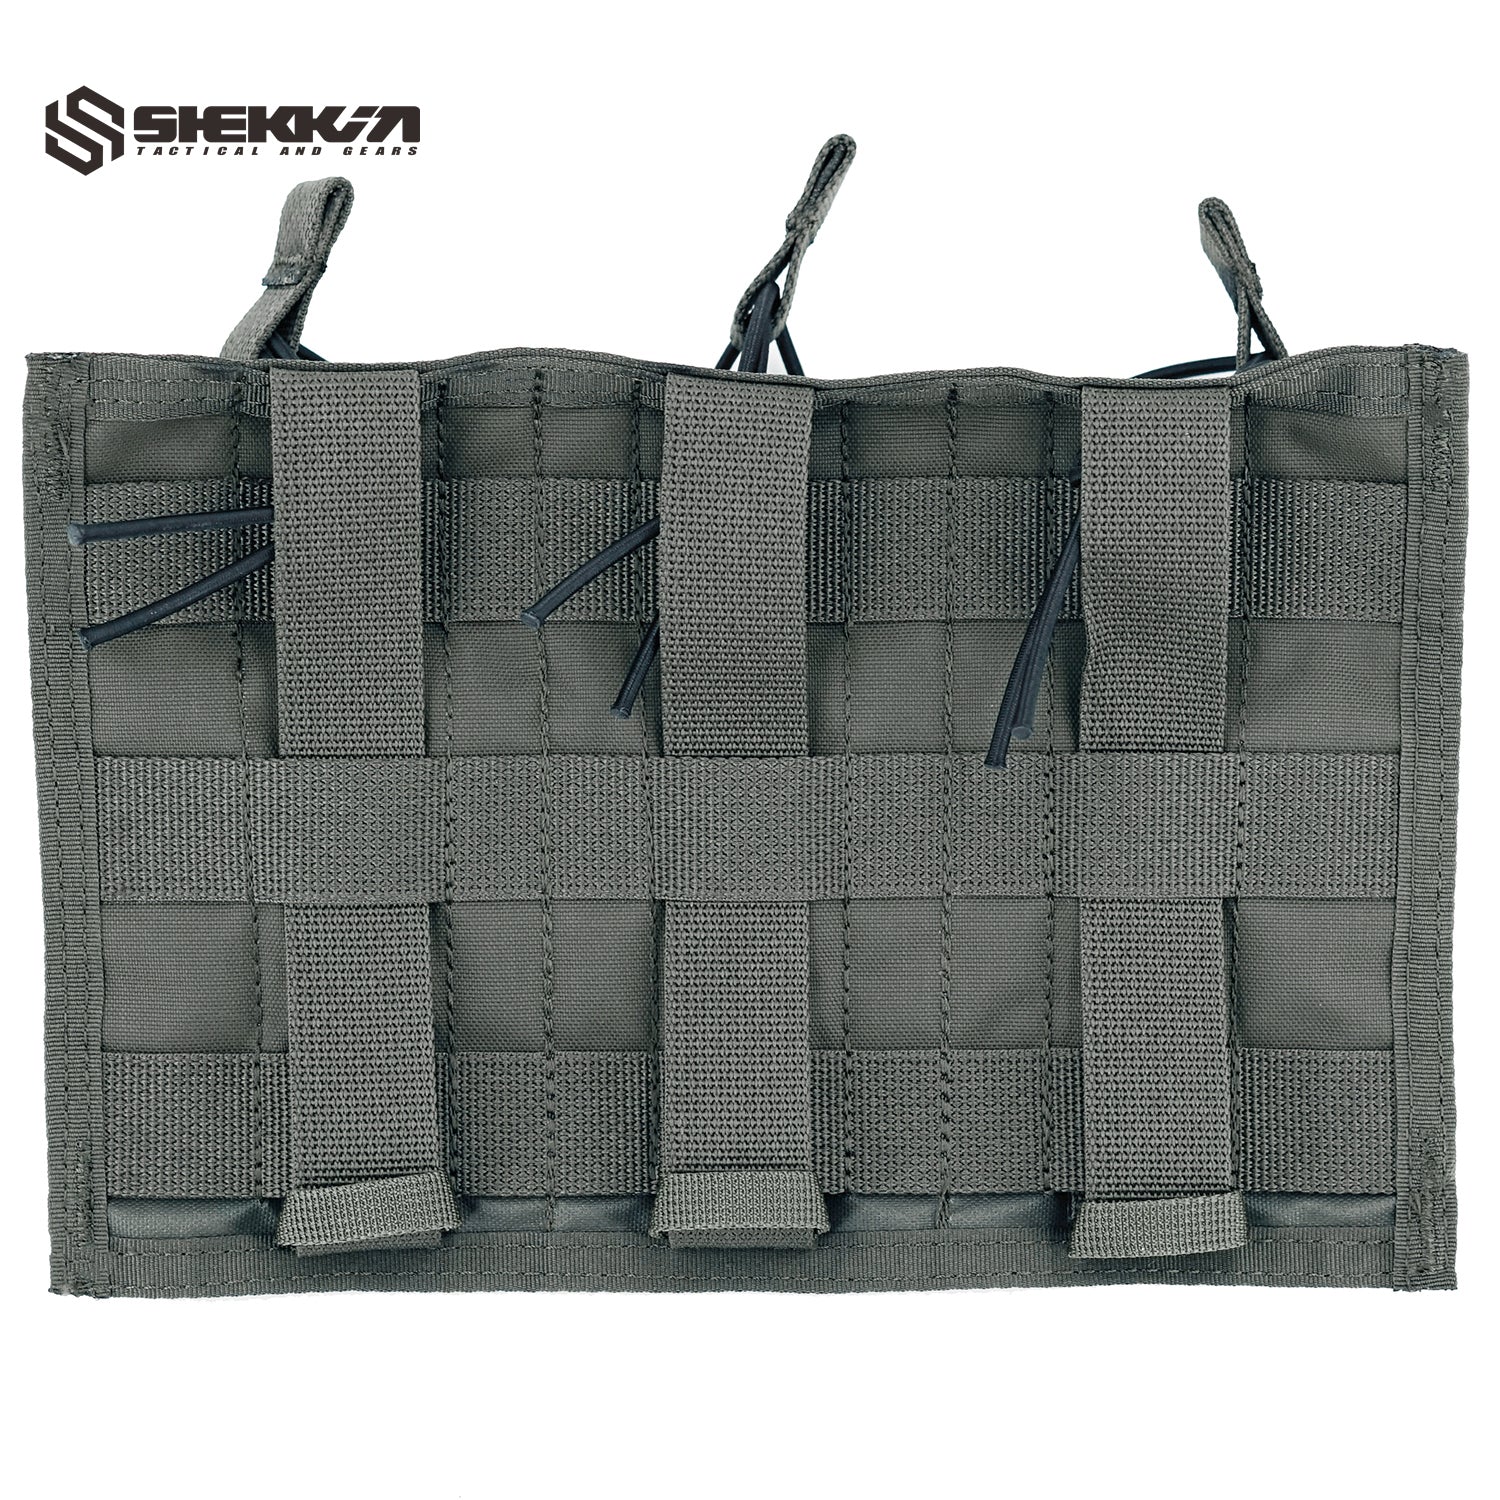 Pre MSA Paraclete style Smoke green triple M4 mag pouch with velcro front and molle back - Shekkin Gears